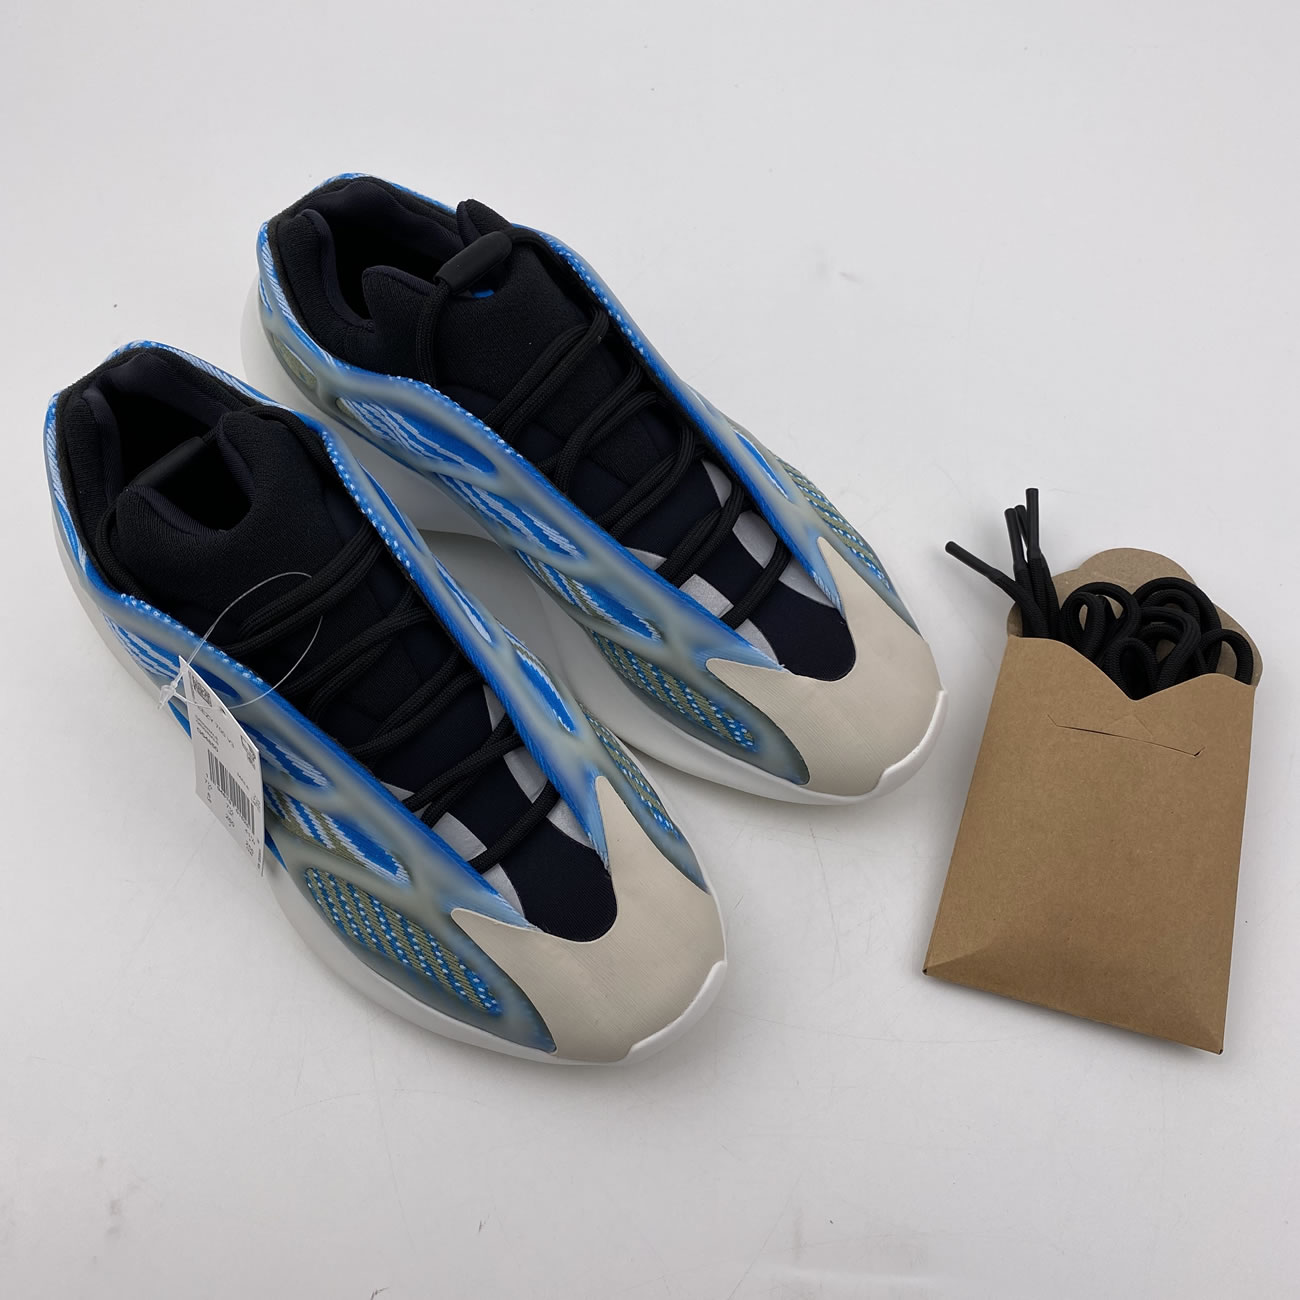 Adidas Yeezy 700 V3 Arazre G54850 New Release Date For Sale (10) - newkick.org